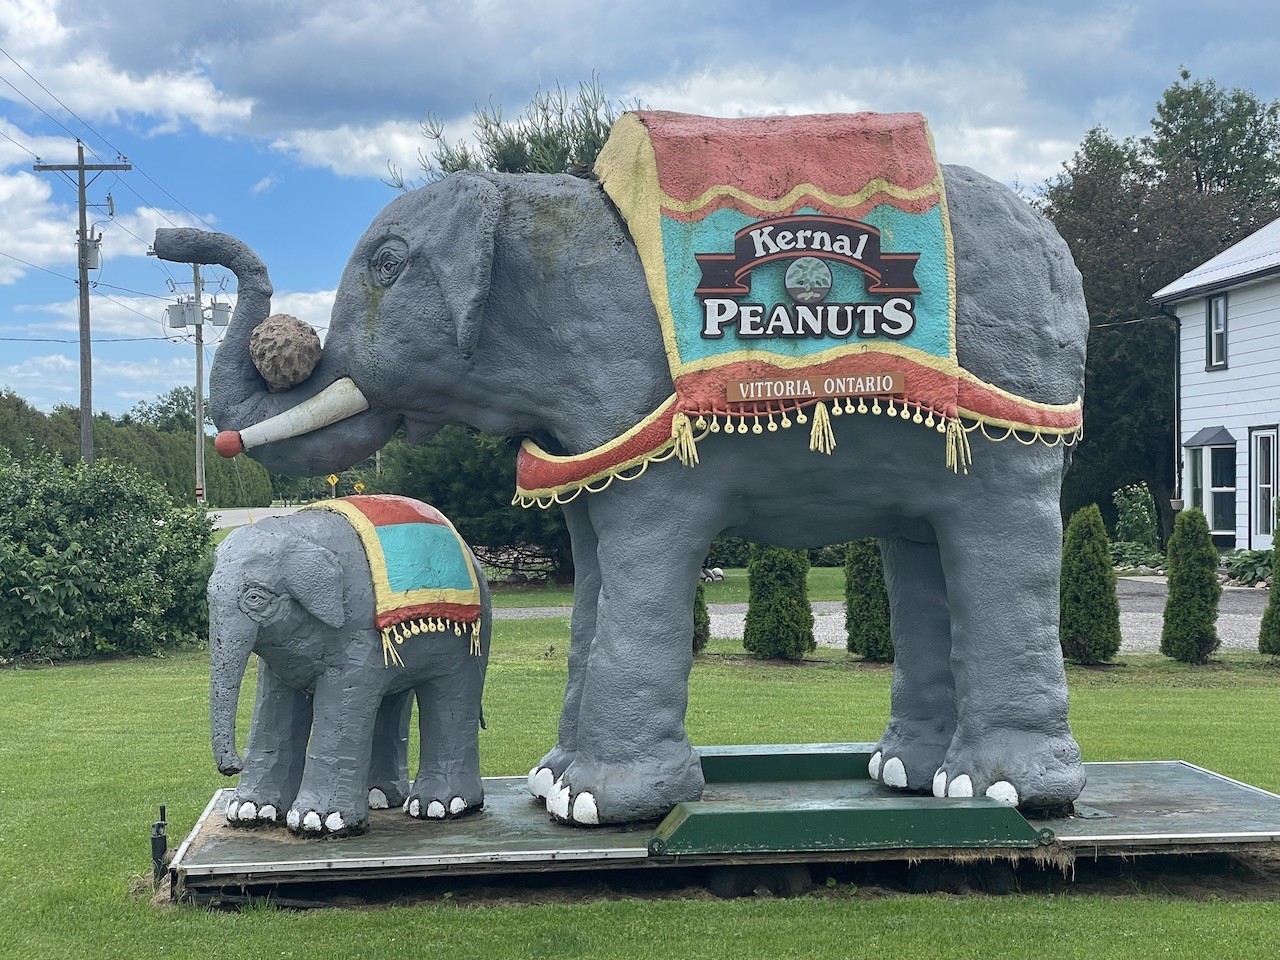 Kernal Peanut Elephant in Vittoria Ontario - Putting an elephant on the front lawn is a great way to get people to stop at Kernal Peanuts Ltd. in Vittoria, Ontario, Canada.